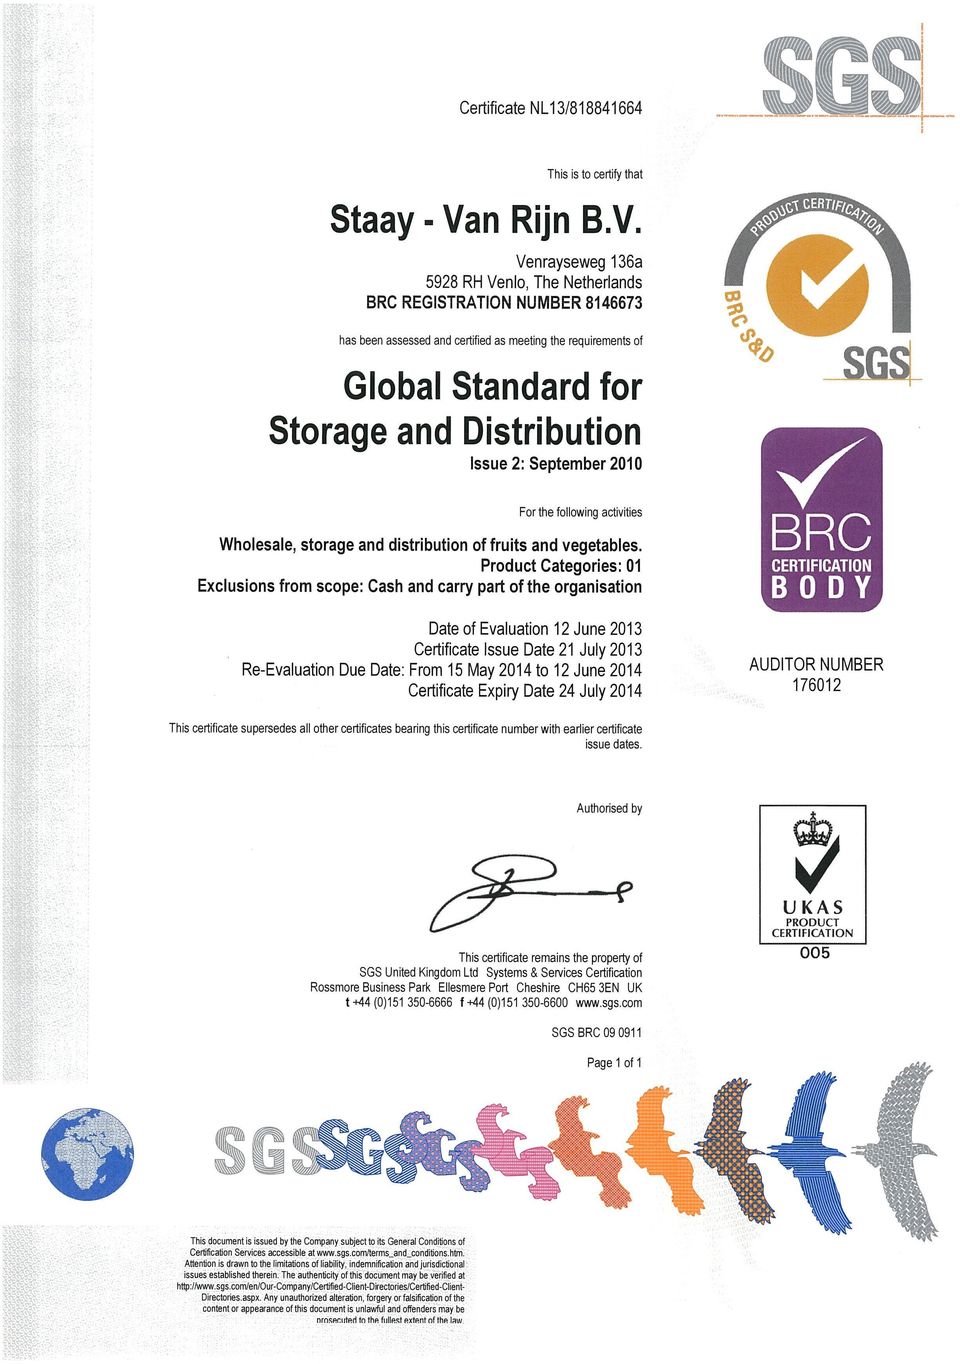 Venrayseweg 136a 5928 RH Venlo, The Netherlands BRC REGISTRATION NUMBER 8146673 has been assessed and certified as meeting the requimments of Global Standard for Storage and Distribution Issue 2: